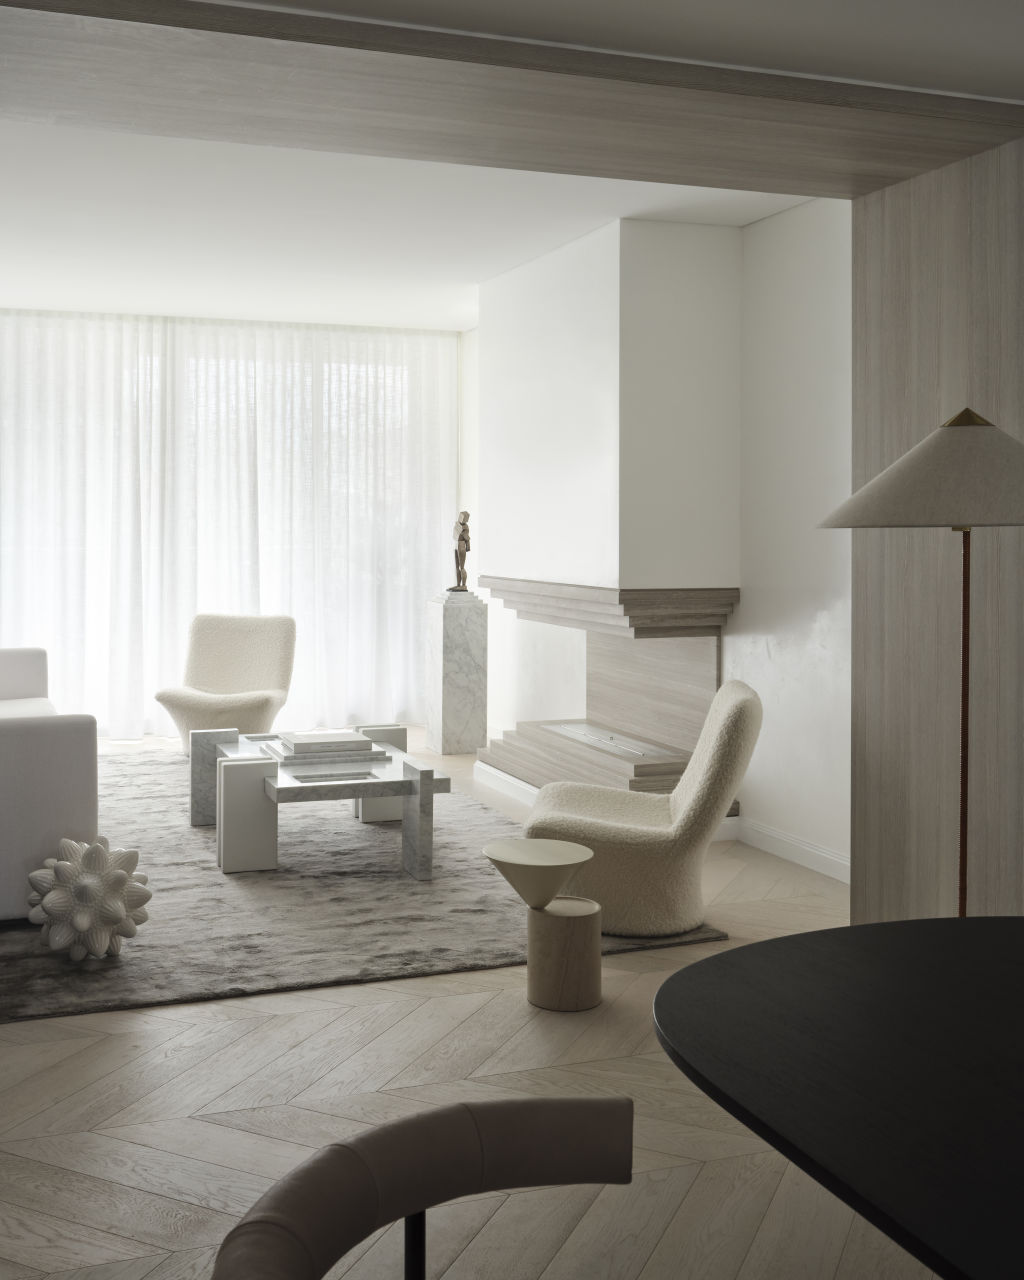 The interior aesthetic is neutral with a focus on luxe fittings and fixtures. Photo: Supplied